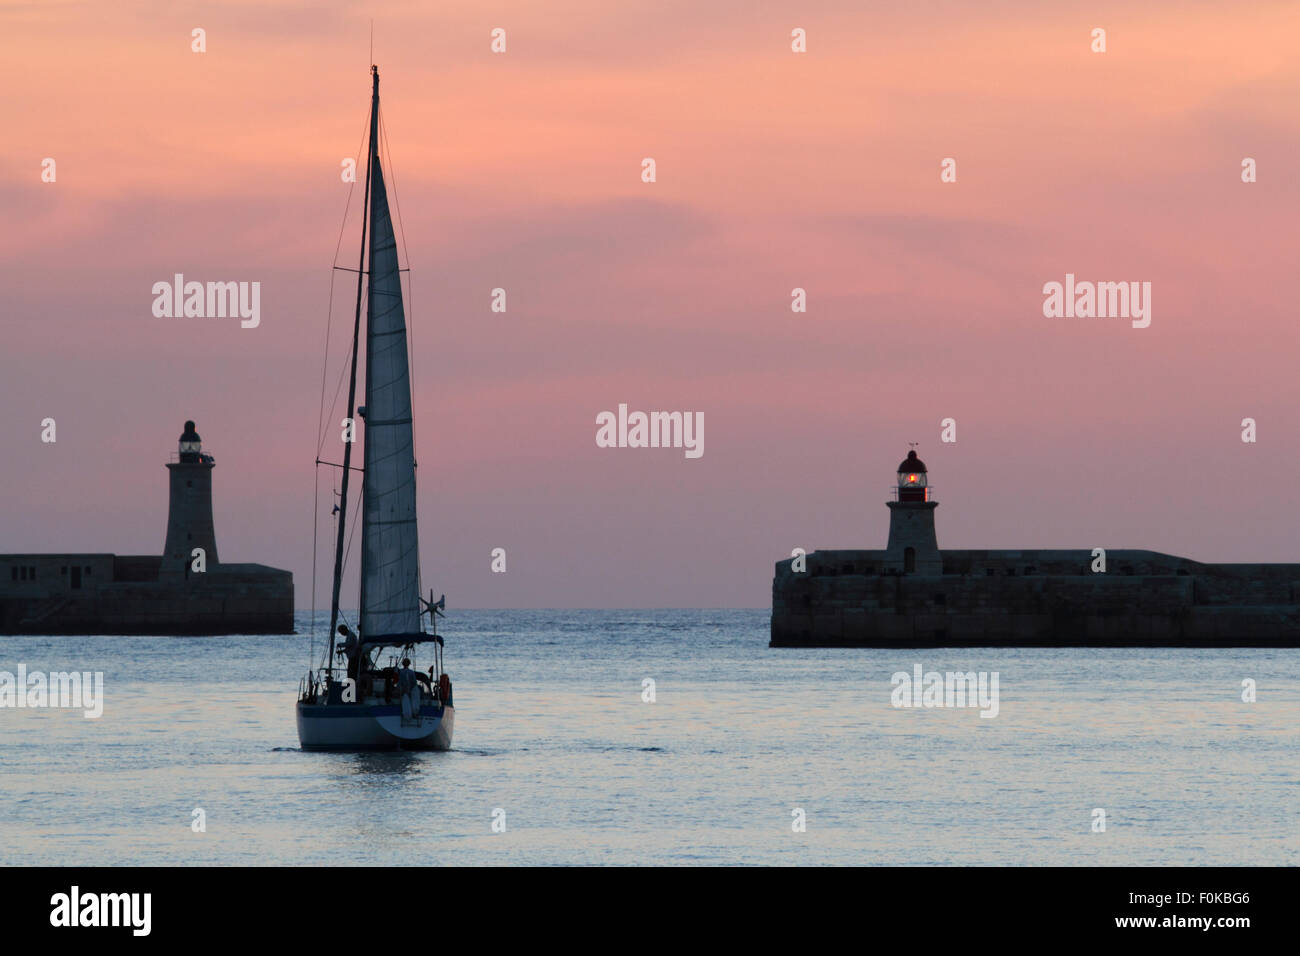 Sailing yacht departing from Malta's Grand Harbour at dawn, with breakwater lighthouses visible Stock Photo